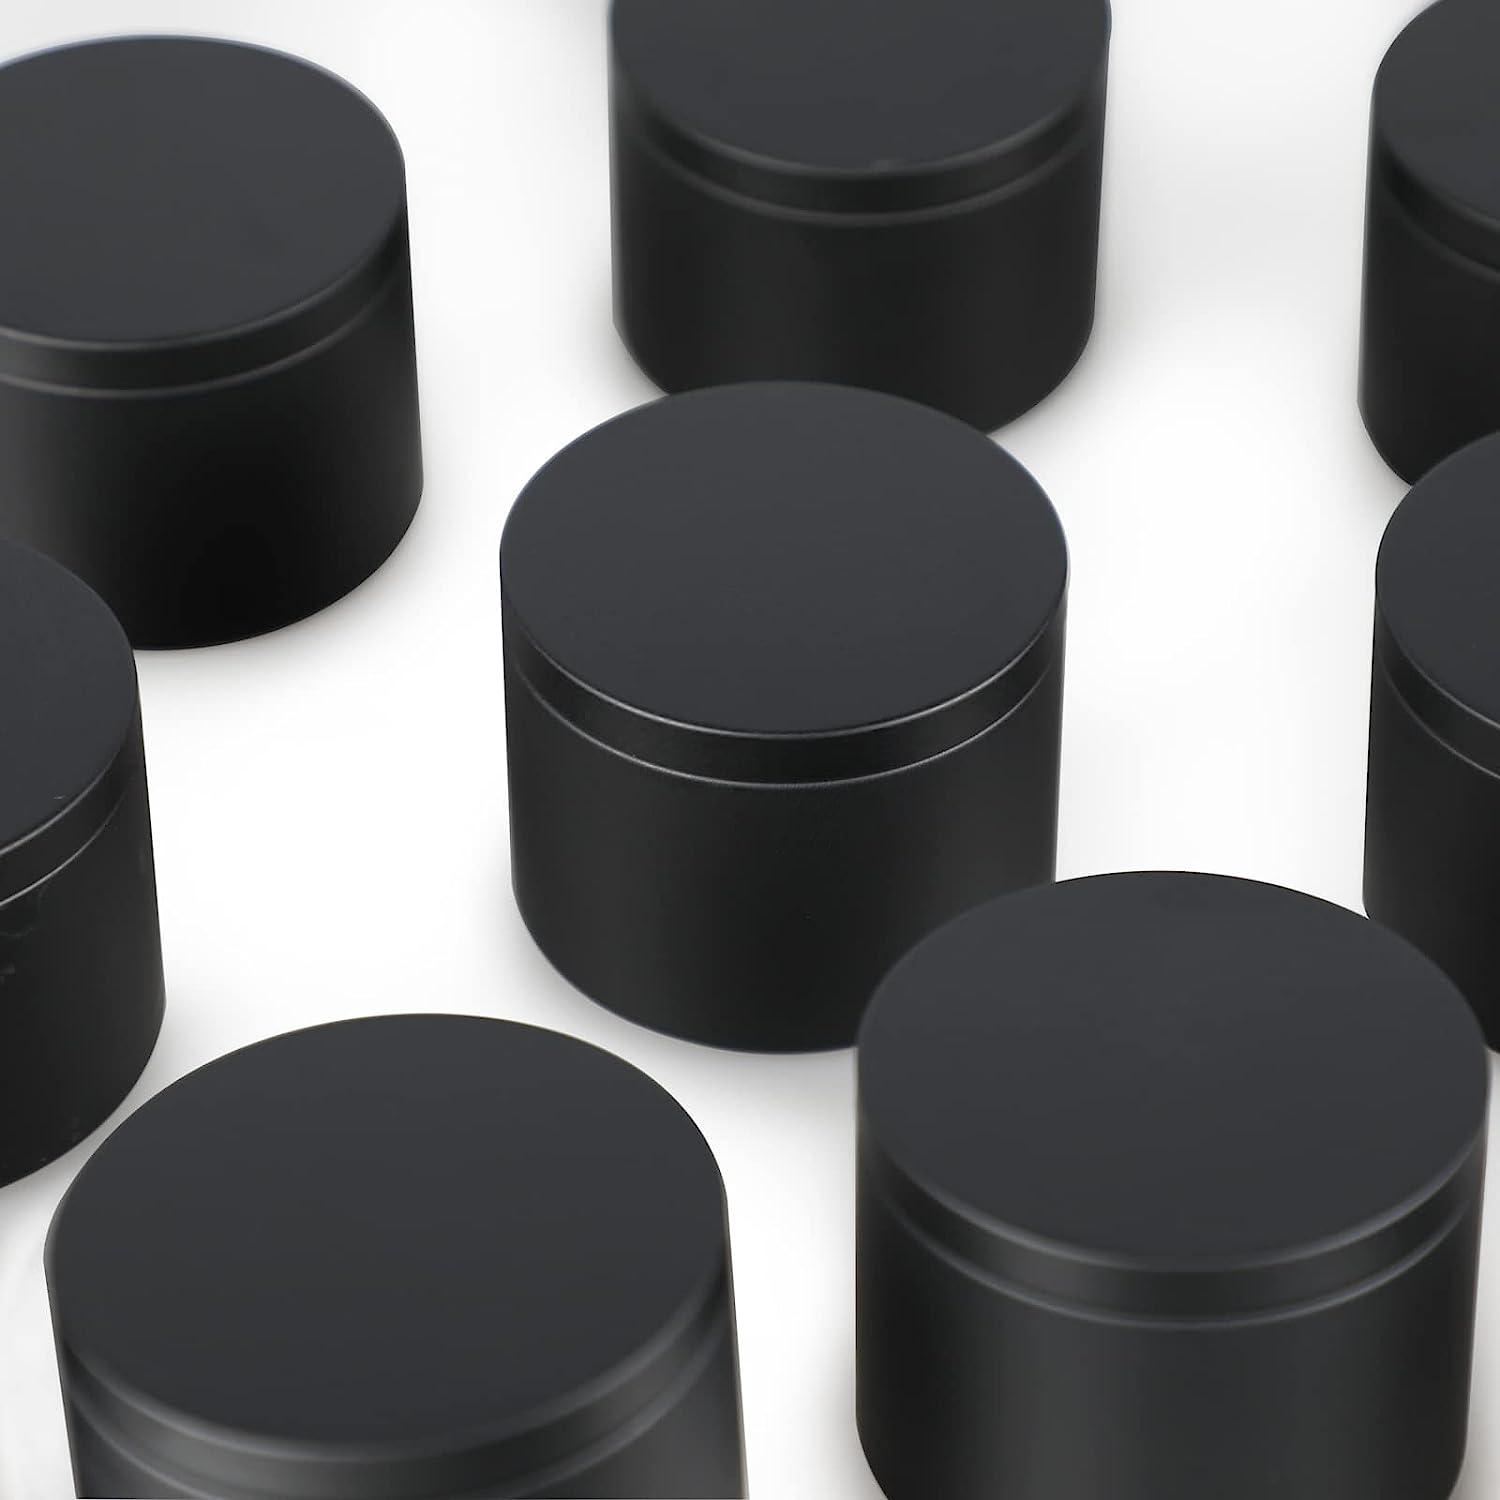 24 Pack Black Tins 8 oz. for Candle Making, Empty Jars Containers with Lids & Labels